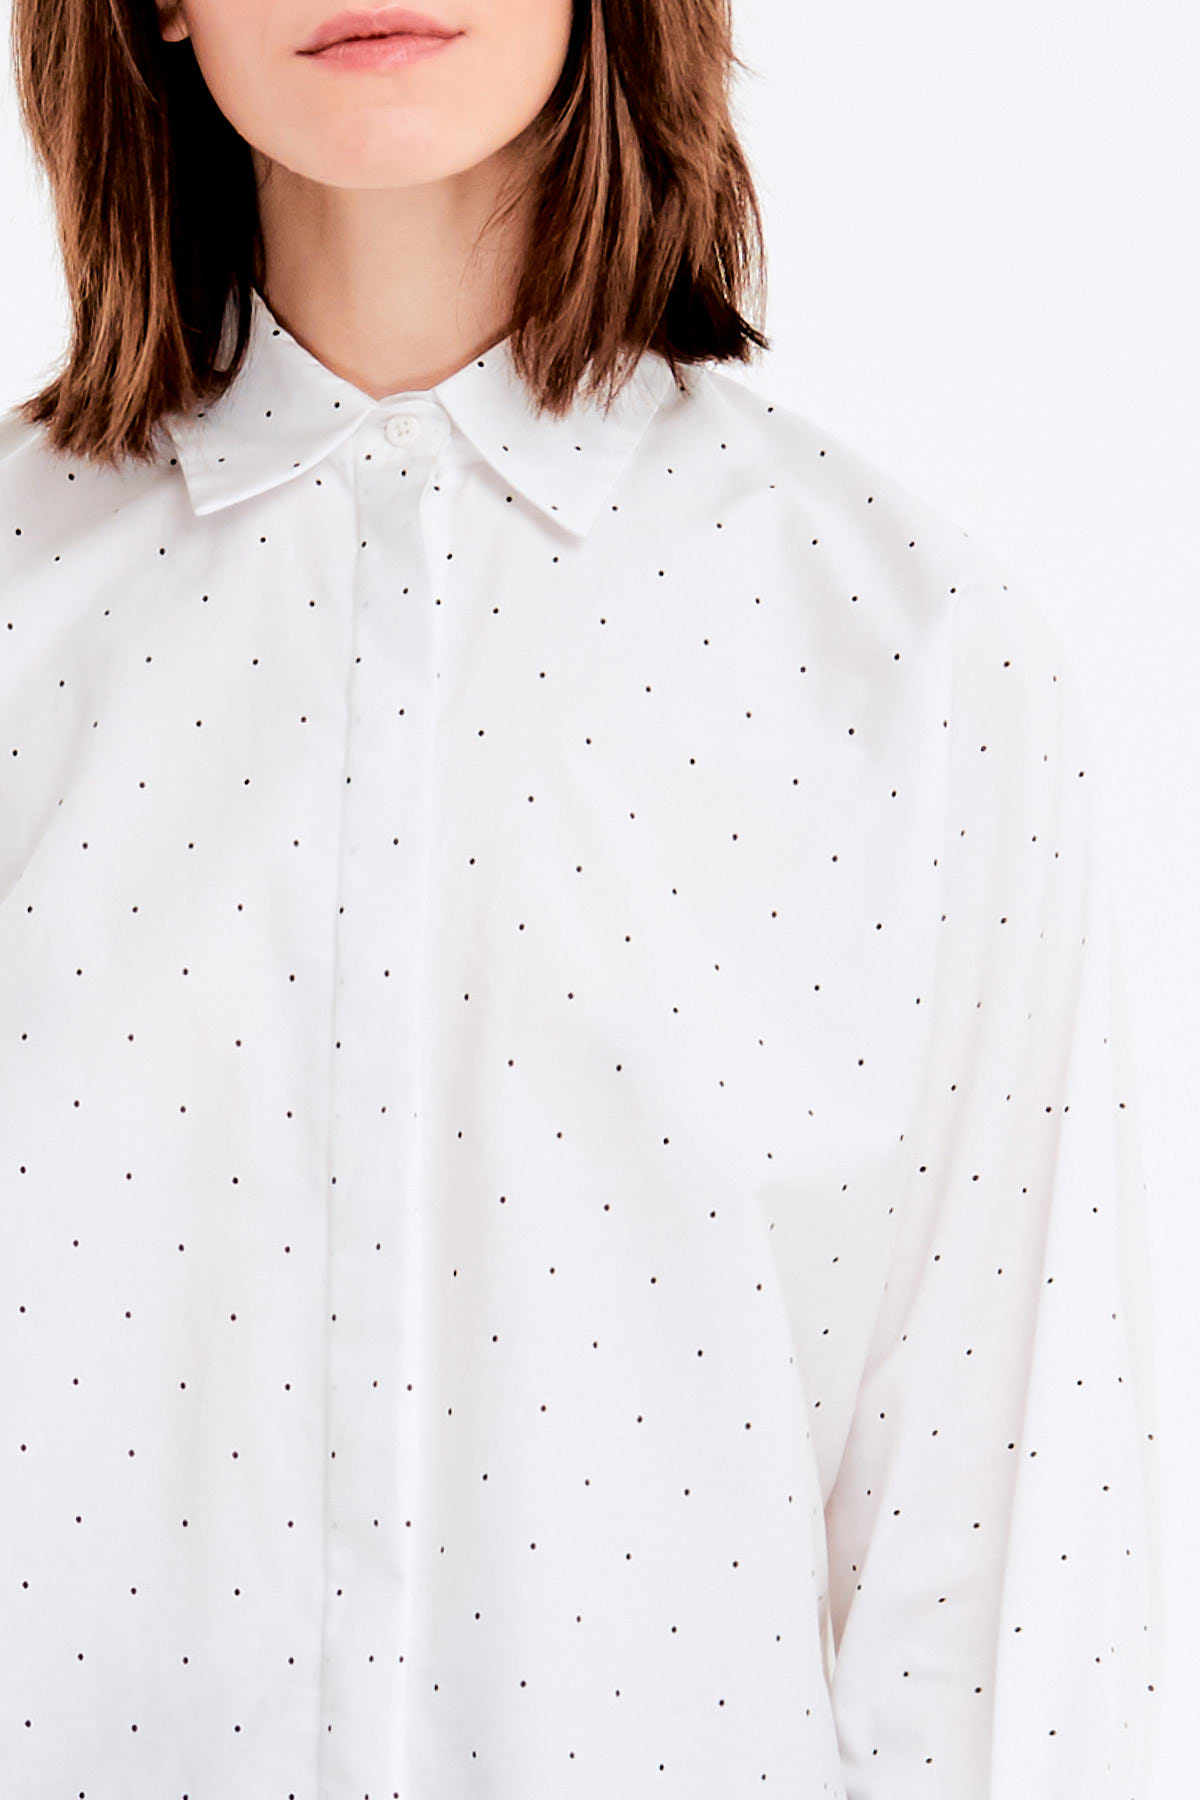 Loose-fitting white shirt with a black polka dot print and a concealed placket, photo 3